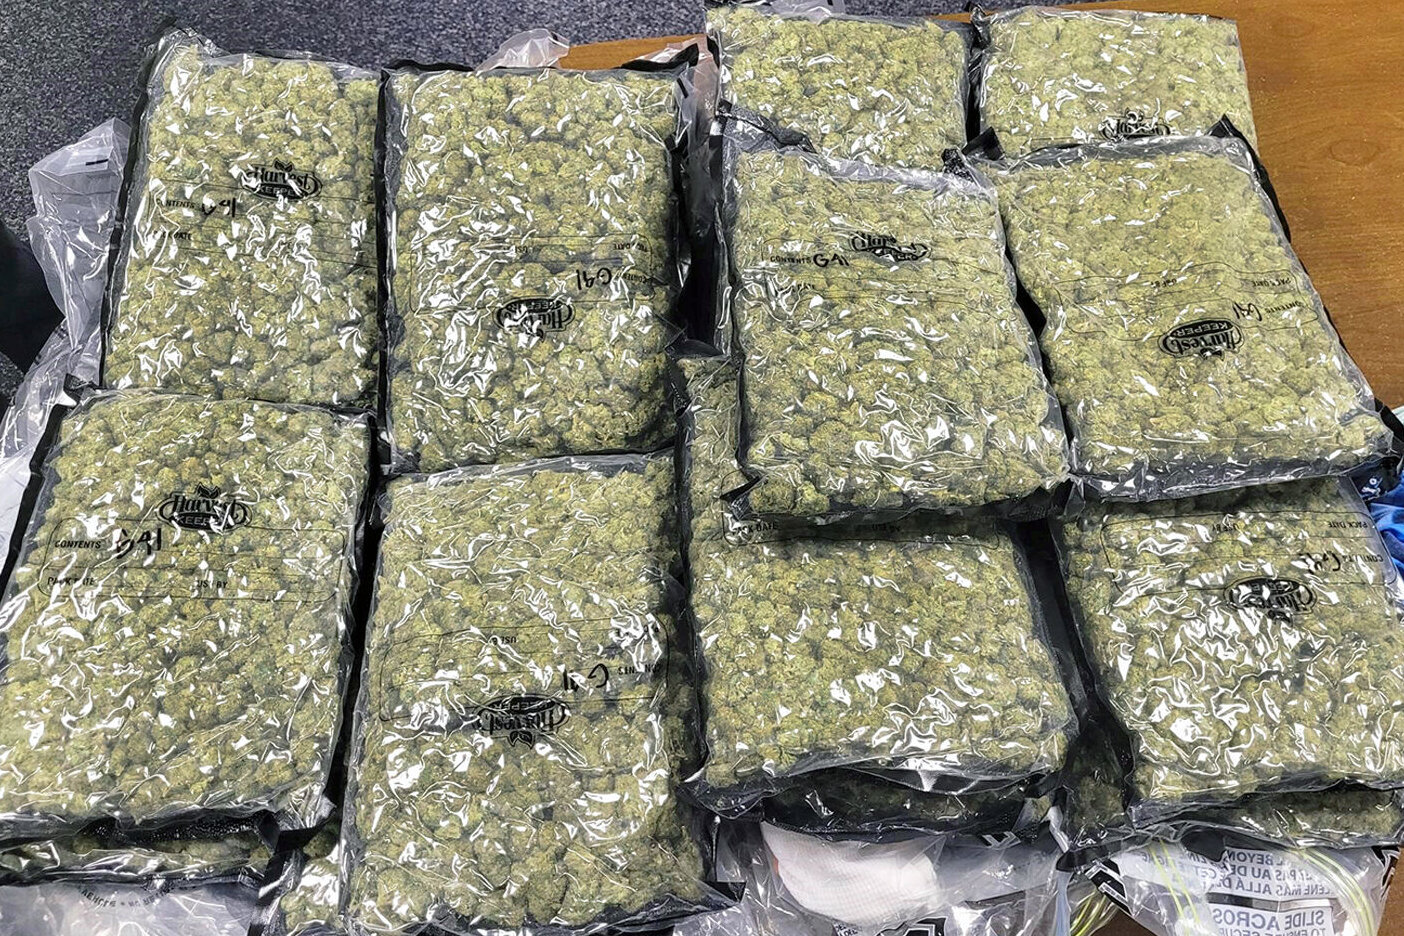 California Man Arrested in Dulles Airport Hashish Smuggling